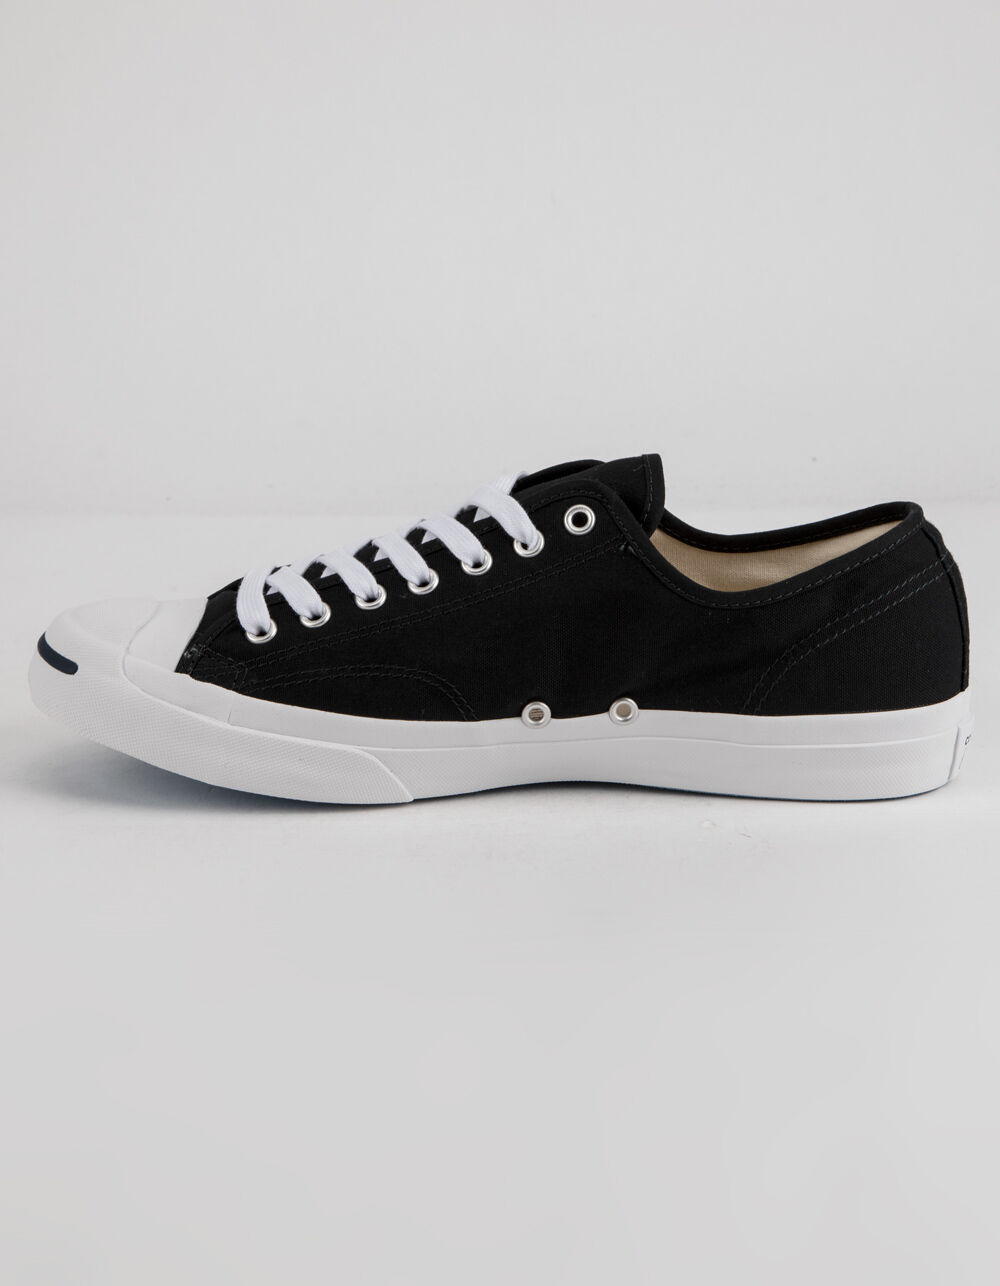 CONVERSE Jack Purcell CP OX Black & White Low Top Shoes - BLACK 